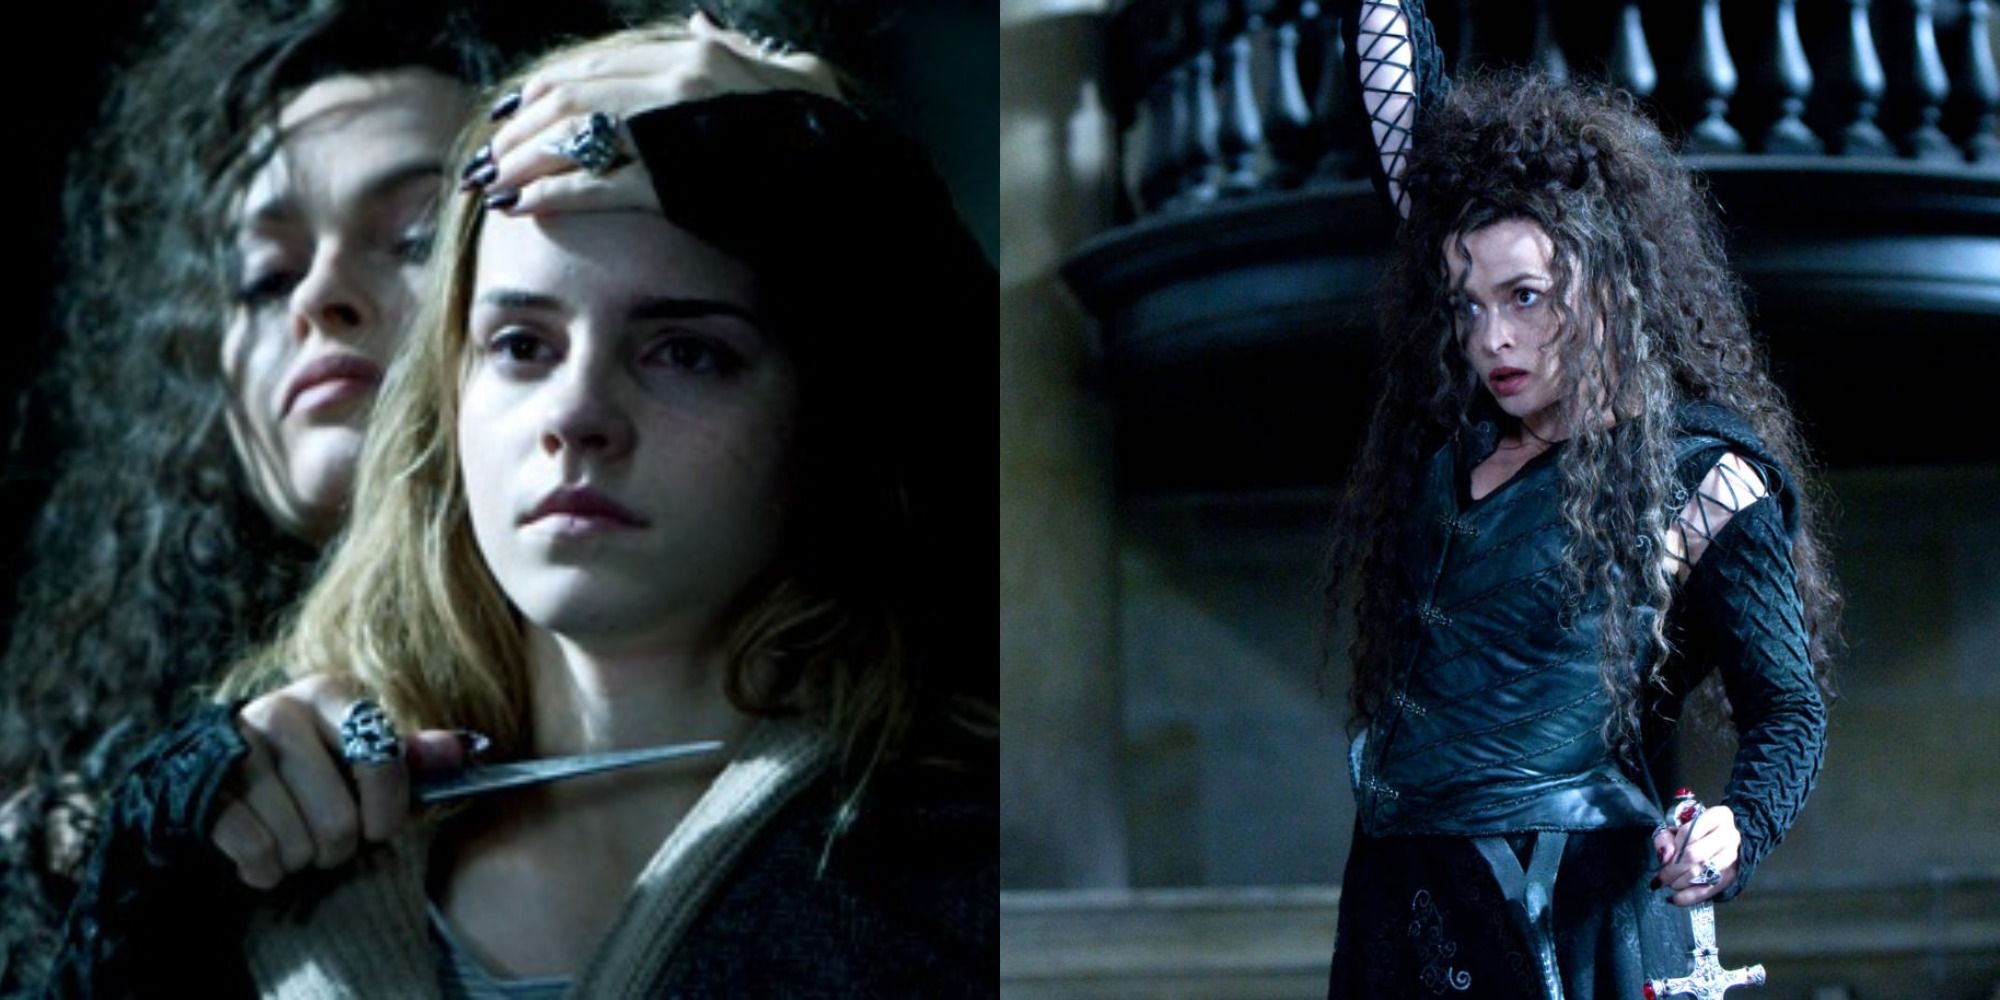 Split image showing Bellatrix torturing Hermione and raising her wand in Harry Potter